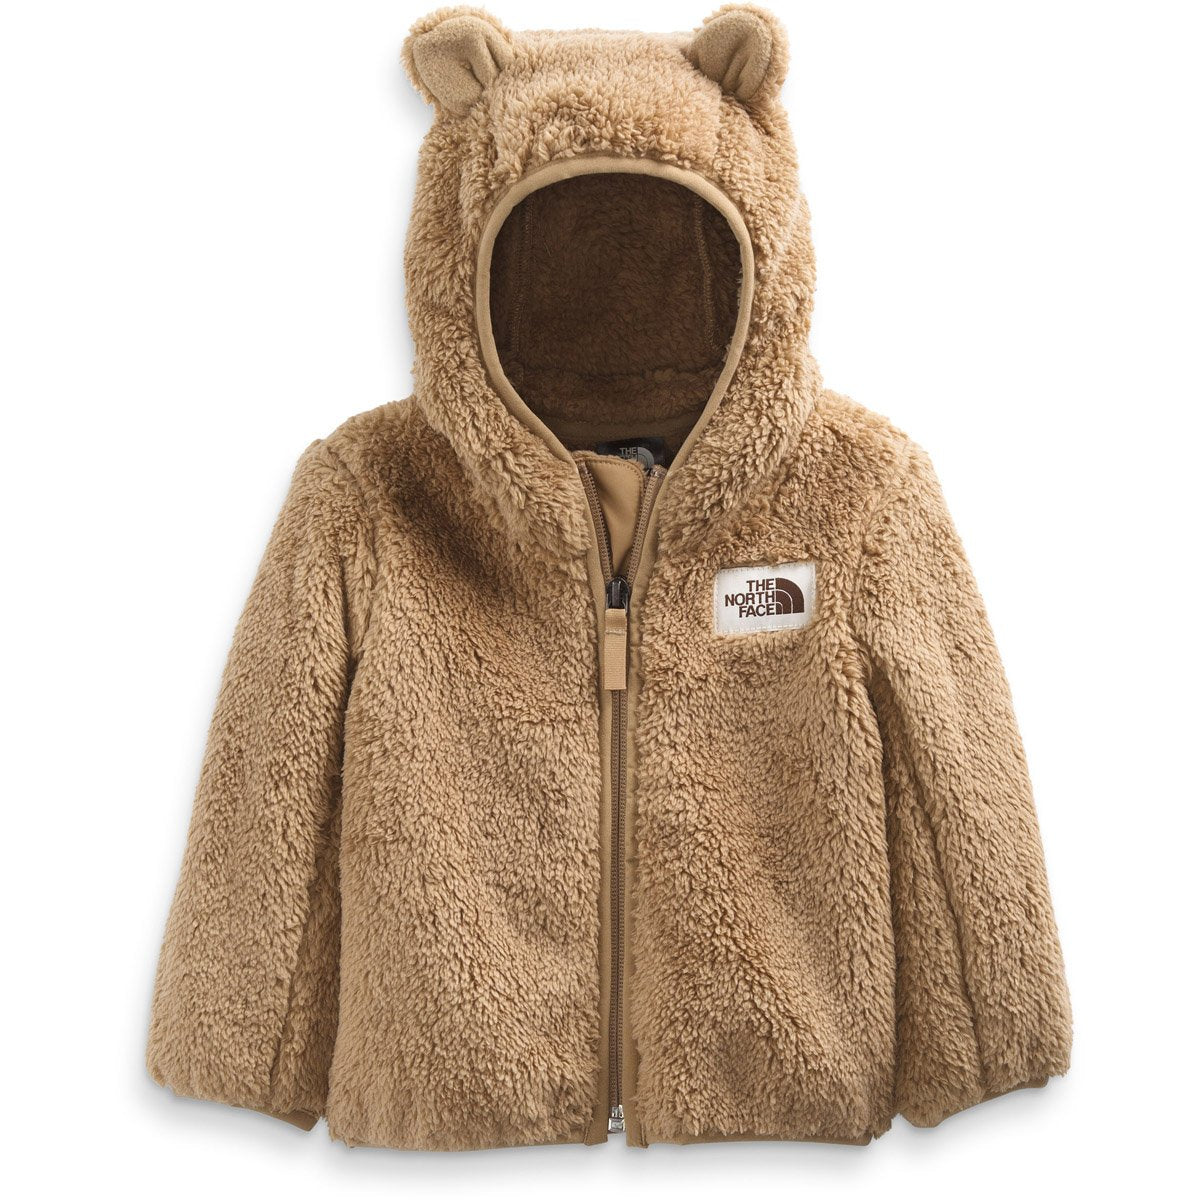 Infant Campshire Bear Hoodie